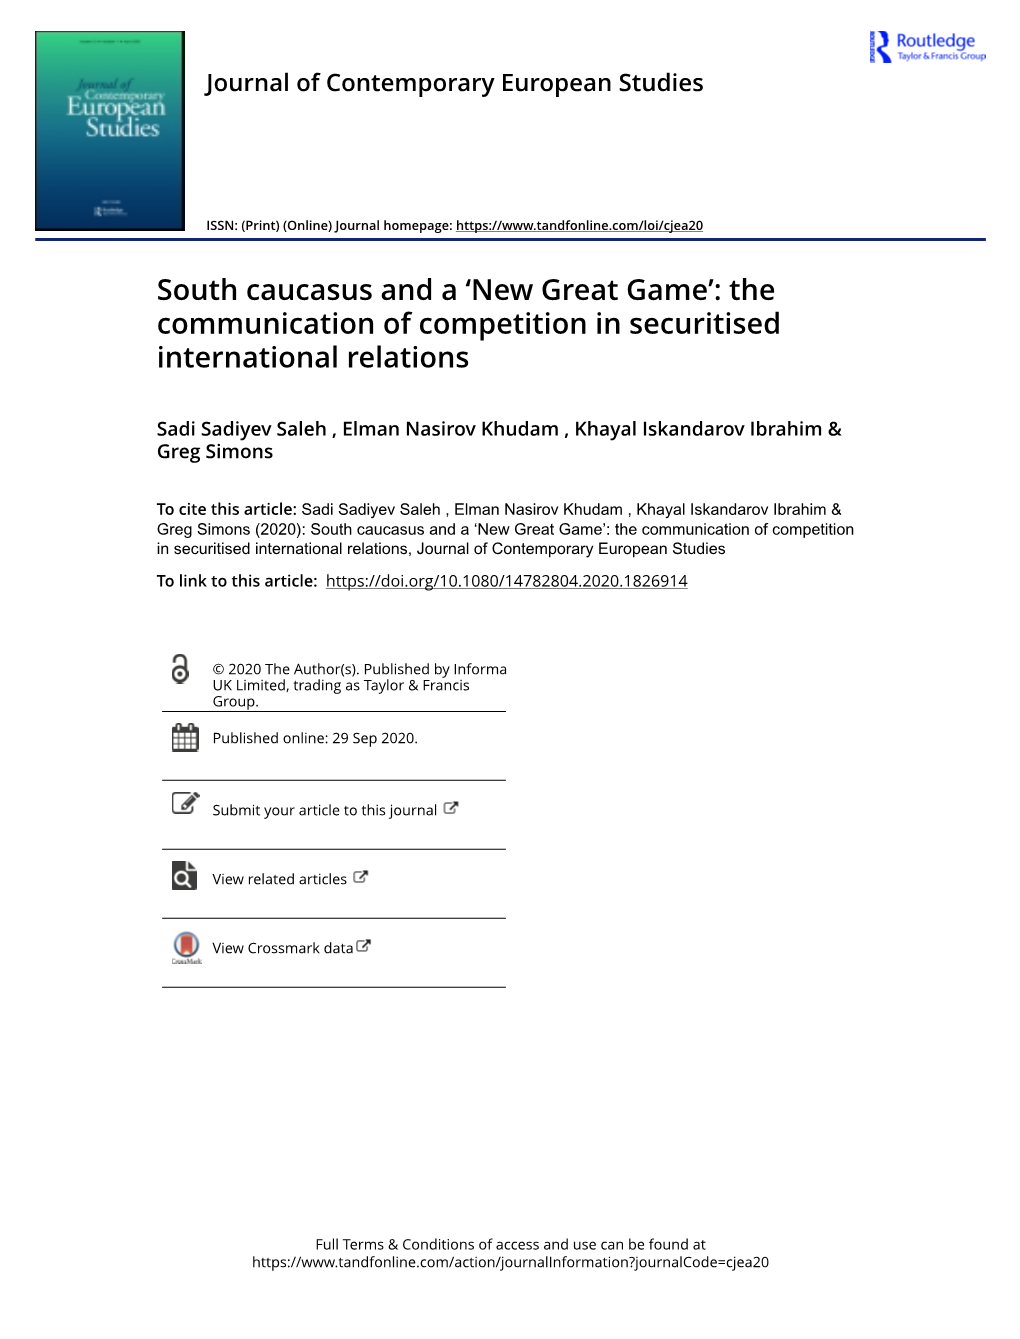 South Caucasus and a ‘New Great Game’: the Communication of Competition in Securitised International Relations